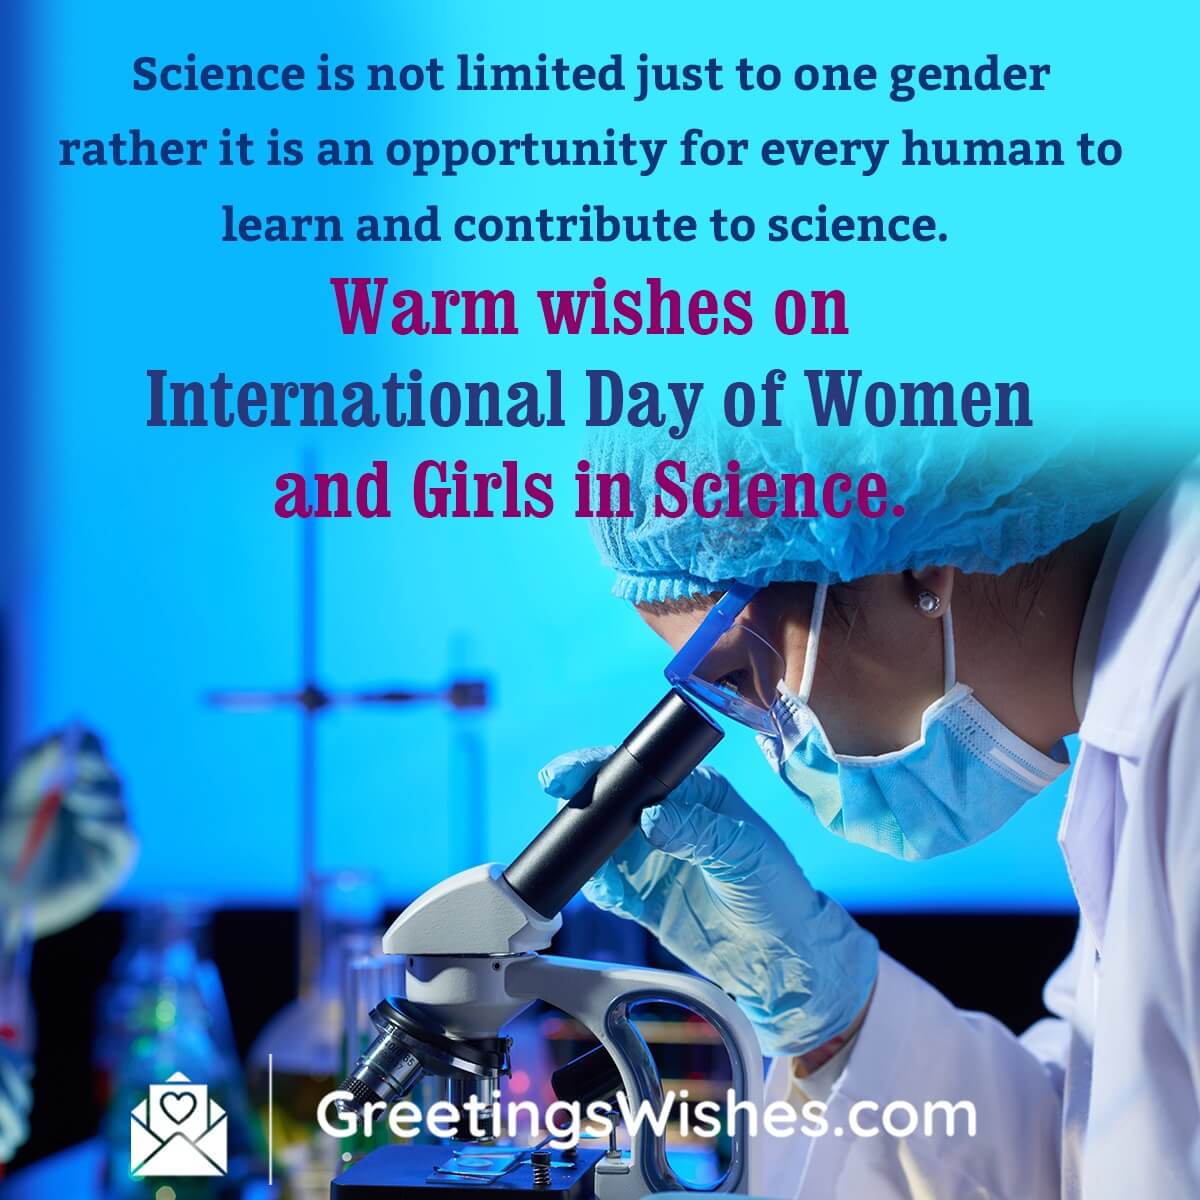 Warm wishes on International Day of Women and Girls in Science.